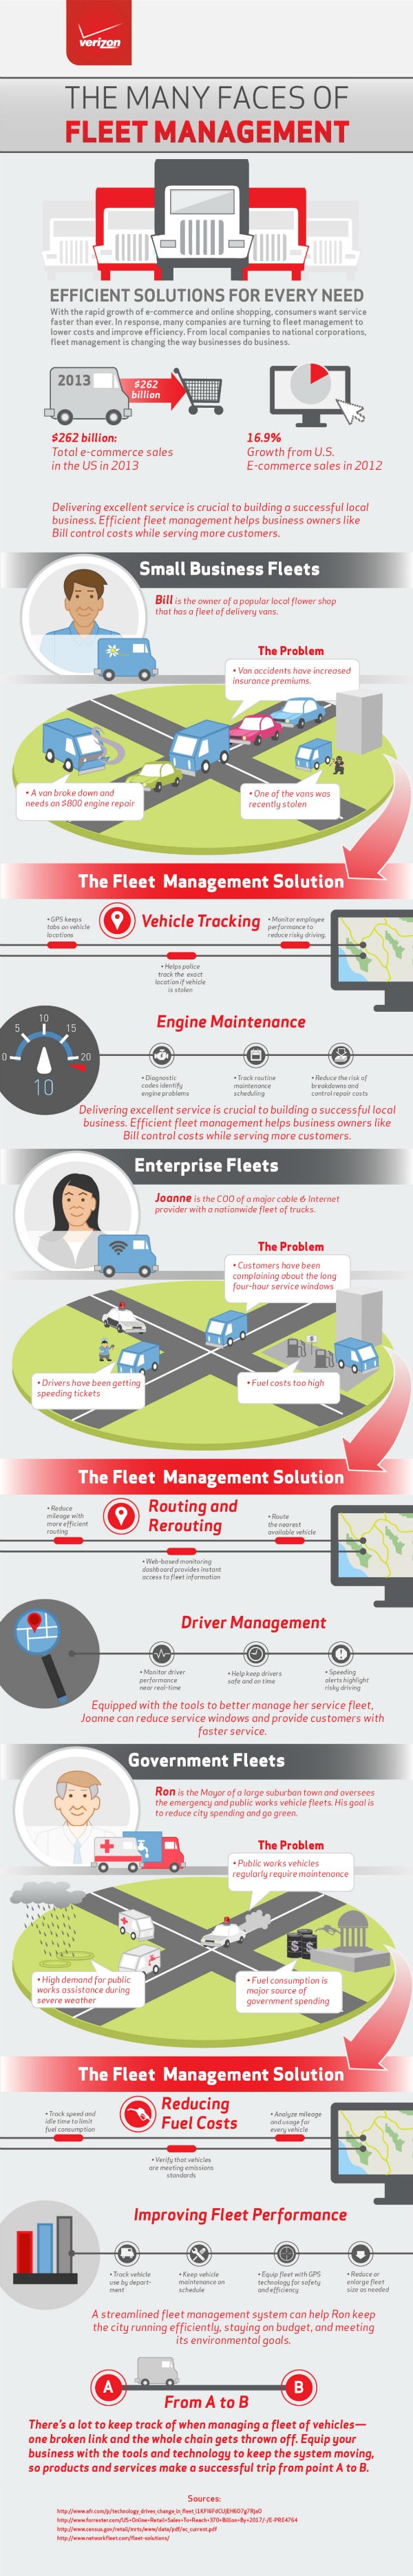 The Many Faces of Fleet Management